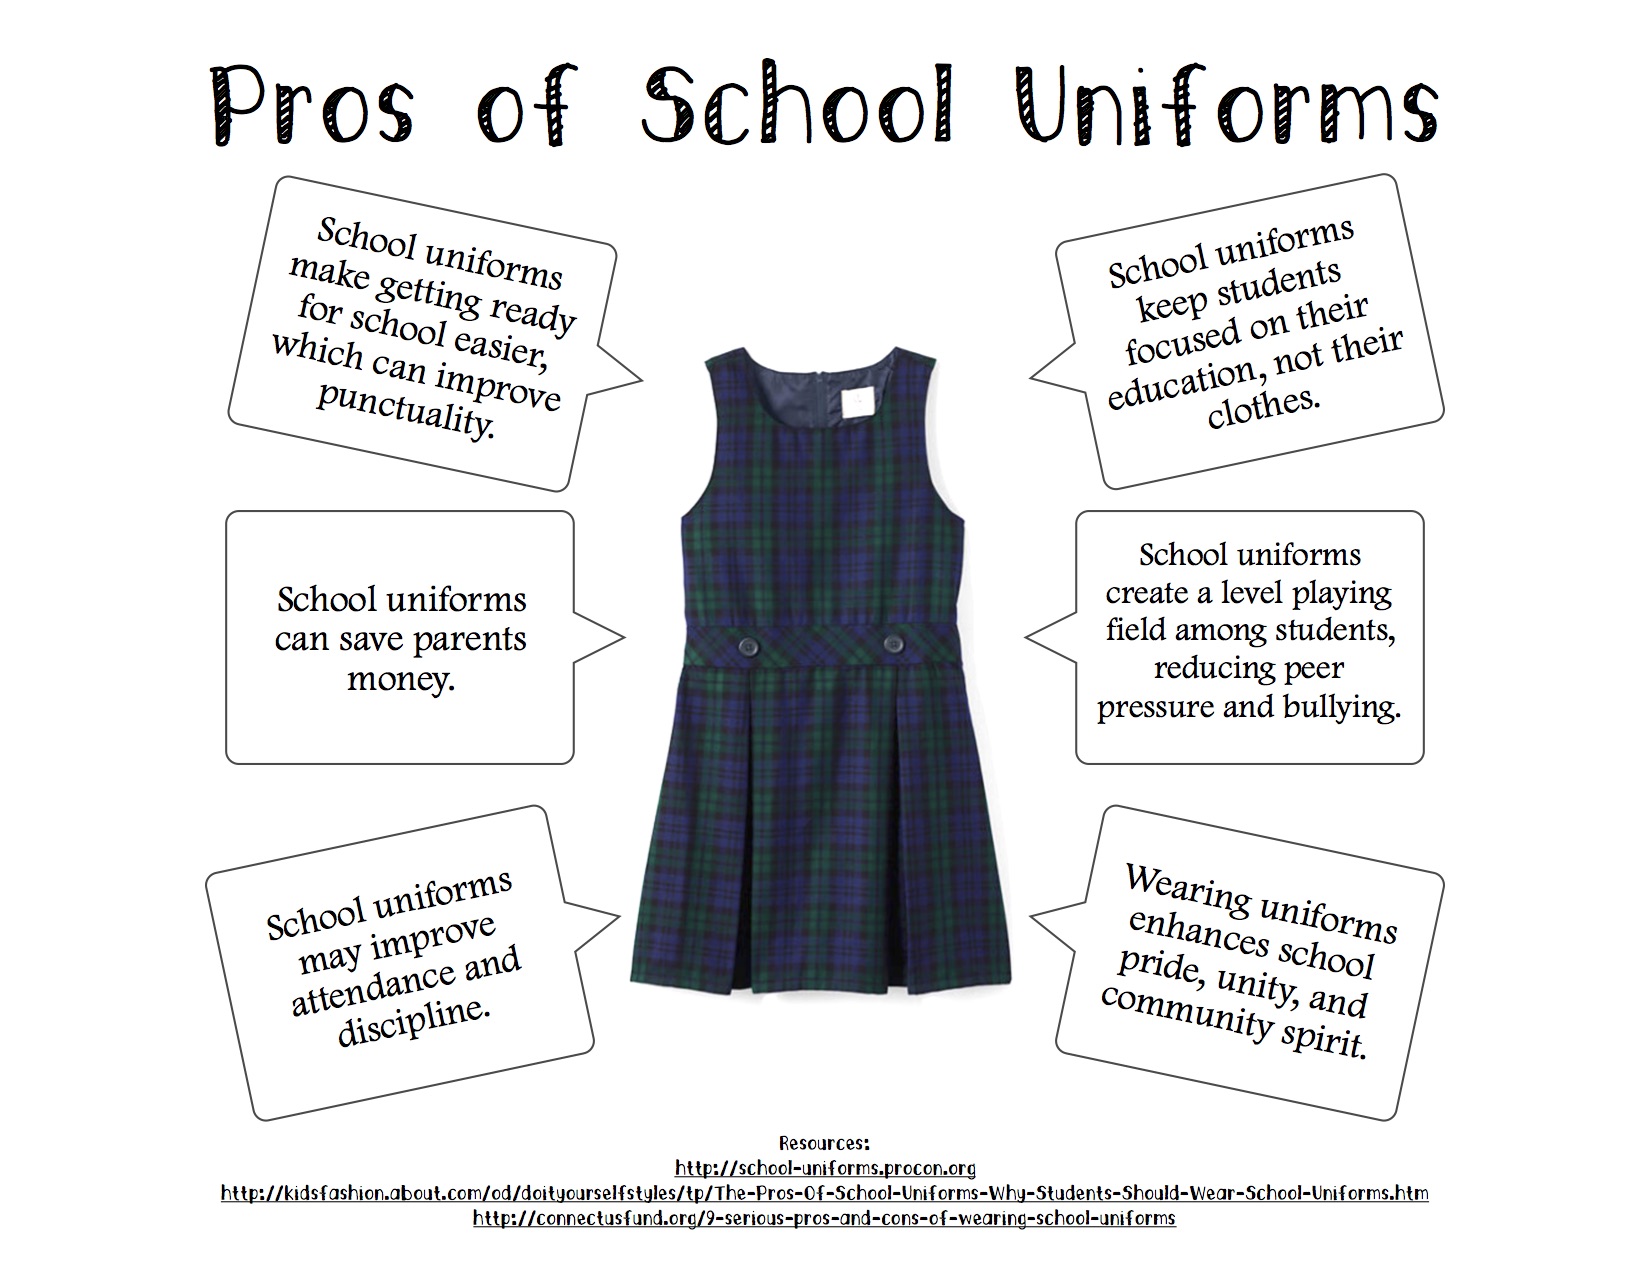 Pros and cons of school uniforms essay